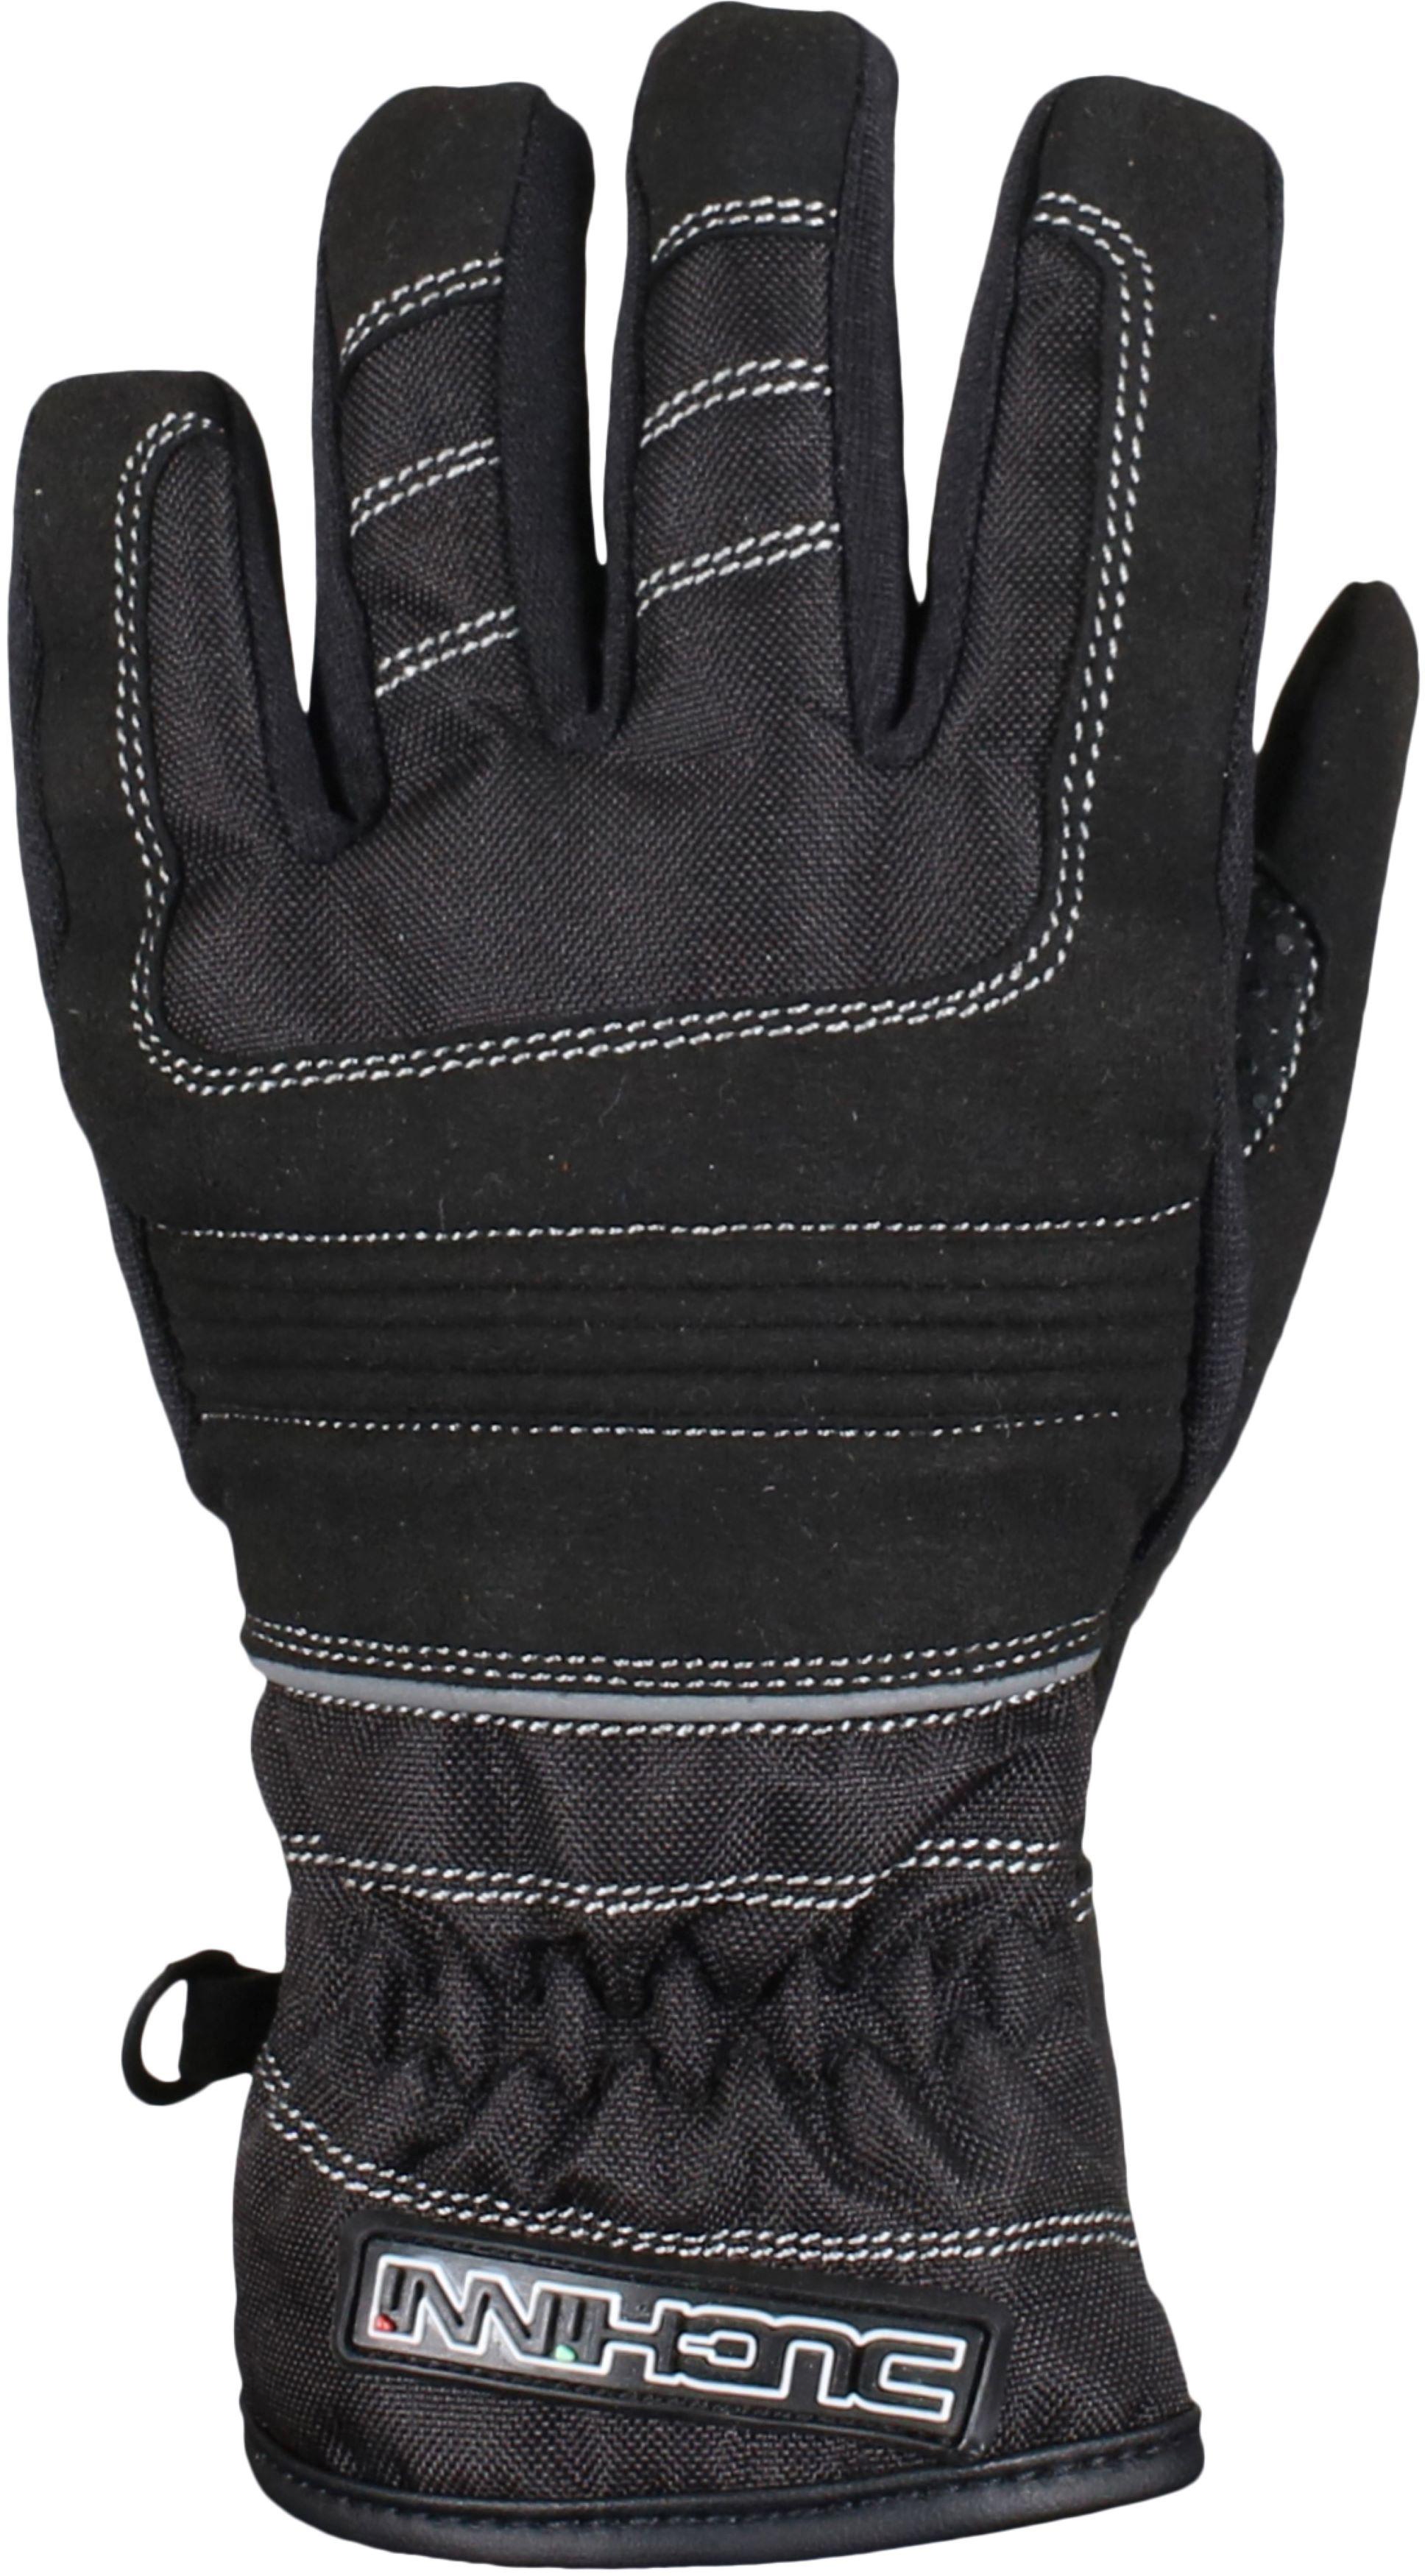 Duchinni Trail Youth Motorcycle Gloves - Black, M